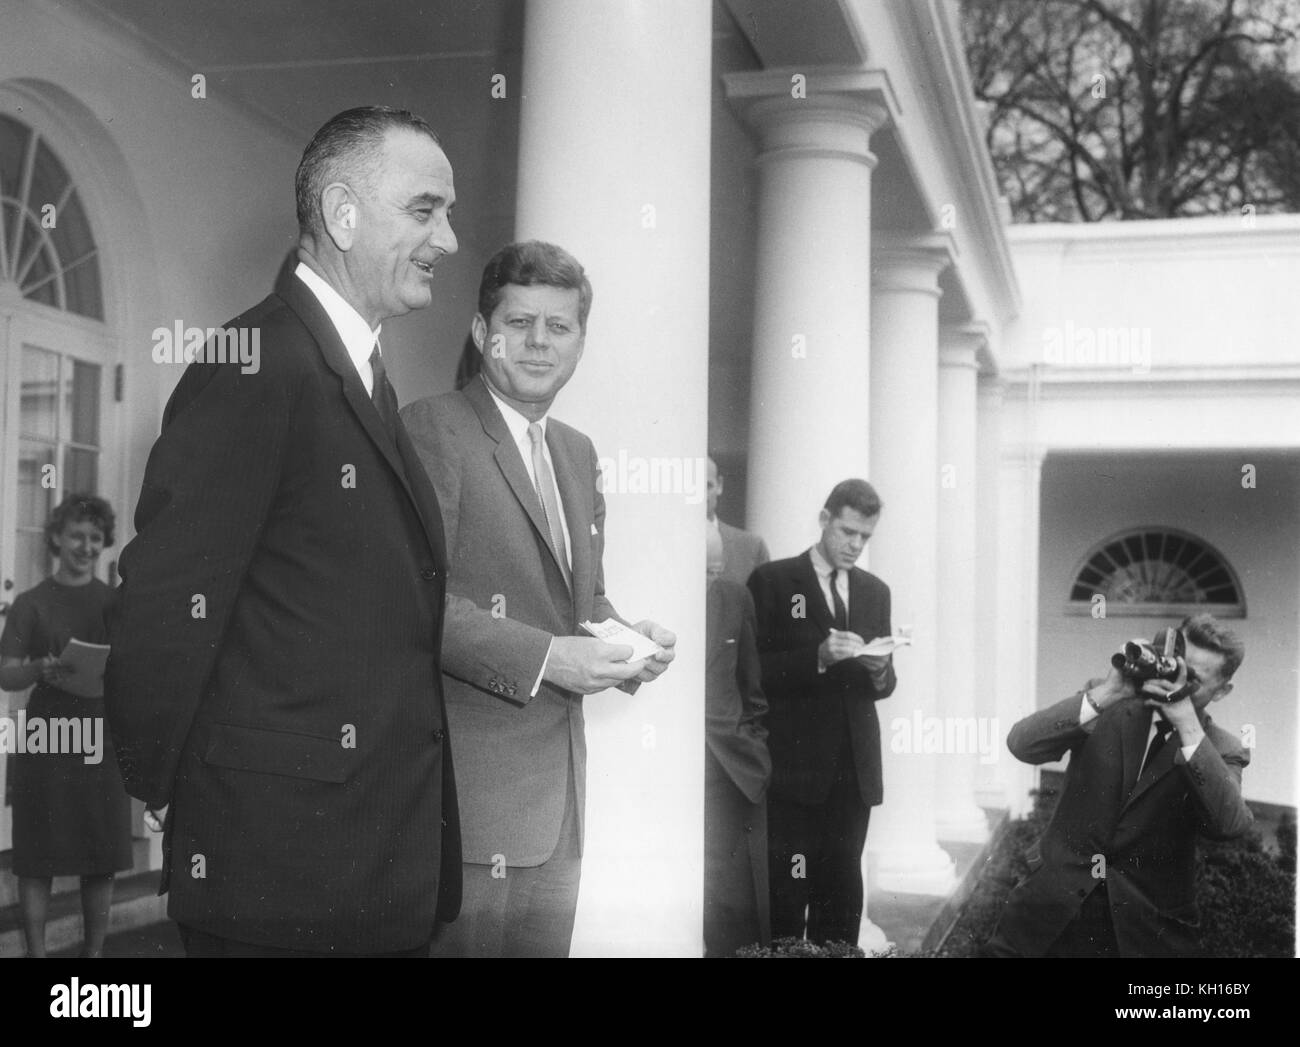 President John F Kennedy and Vice-President Lyndon B Johnson meet with the press in the White House Rose Garden after Kennedy signed Executive Order 10925 requiring government contractors to treat all qualified employees equally 'without regard to their race, creed, color or national origin,' Washington, DC, 03/06/1961. Photo by Abbie Rowe Stock Photo